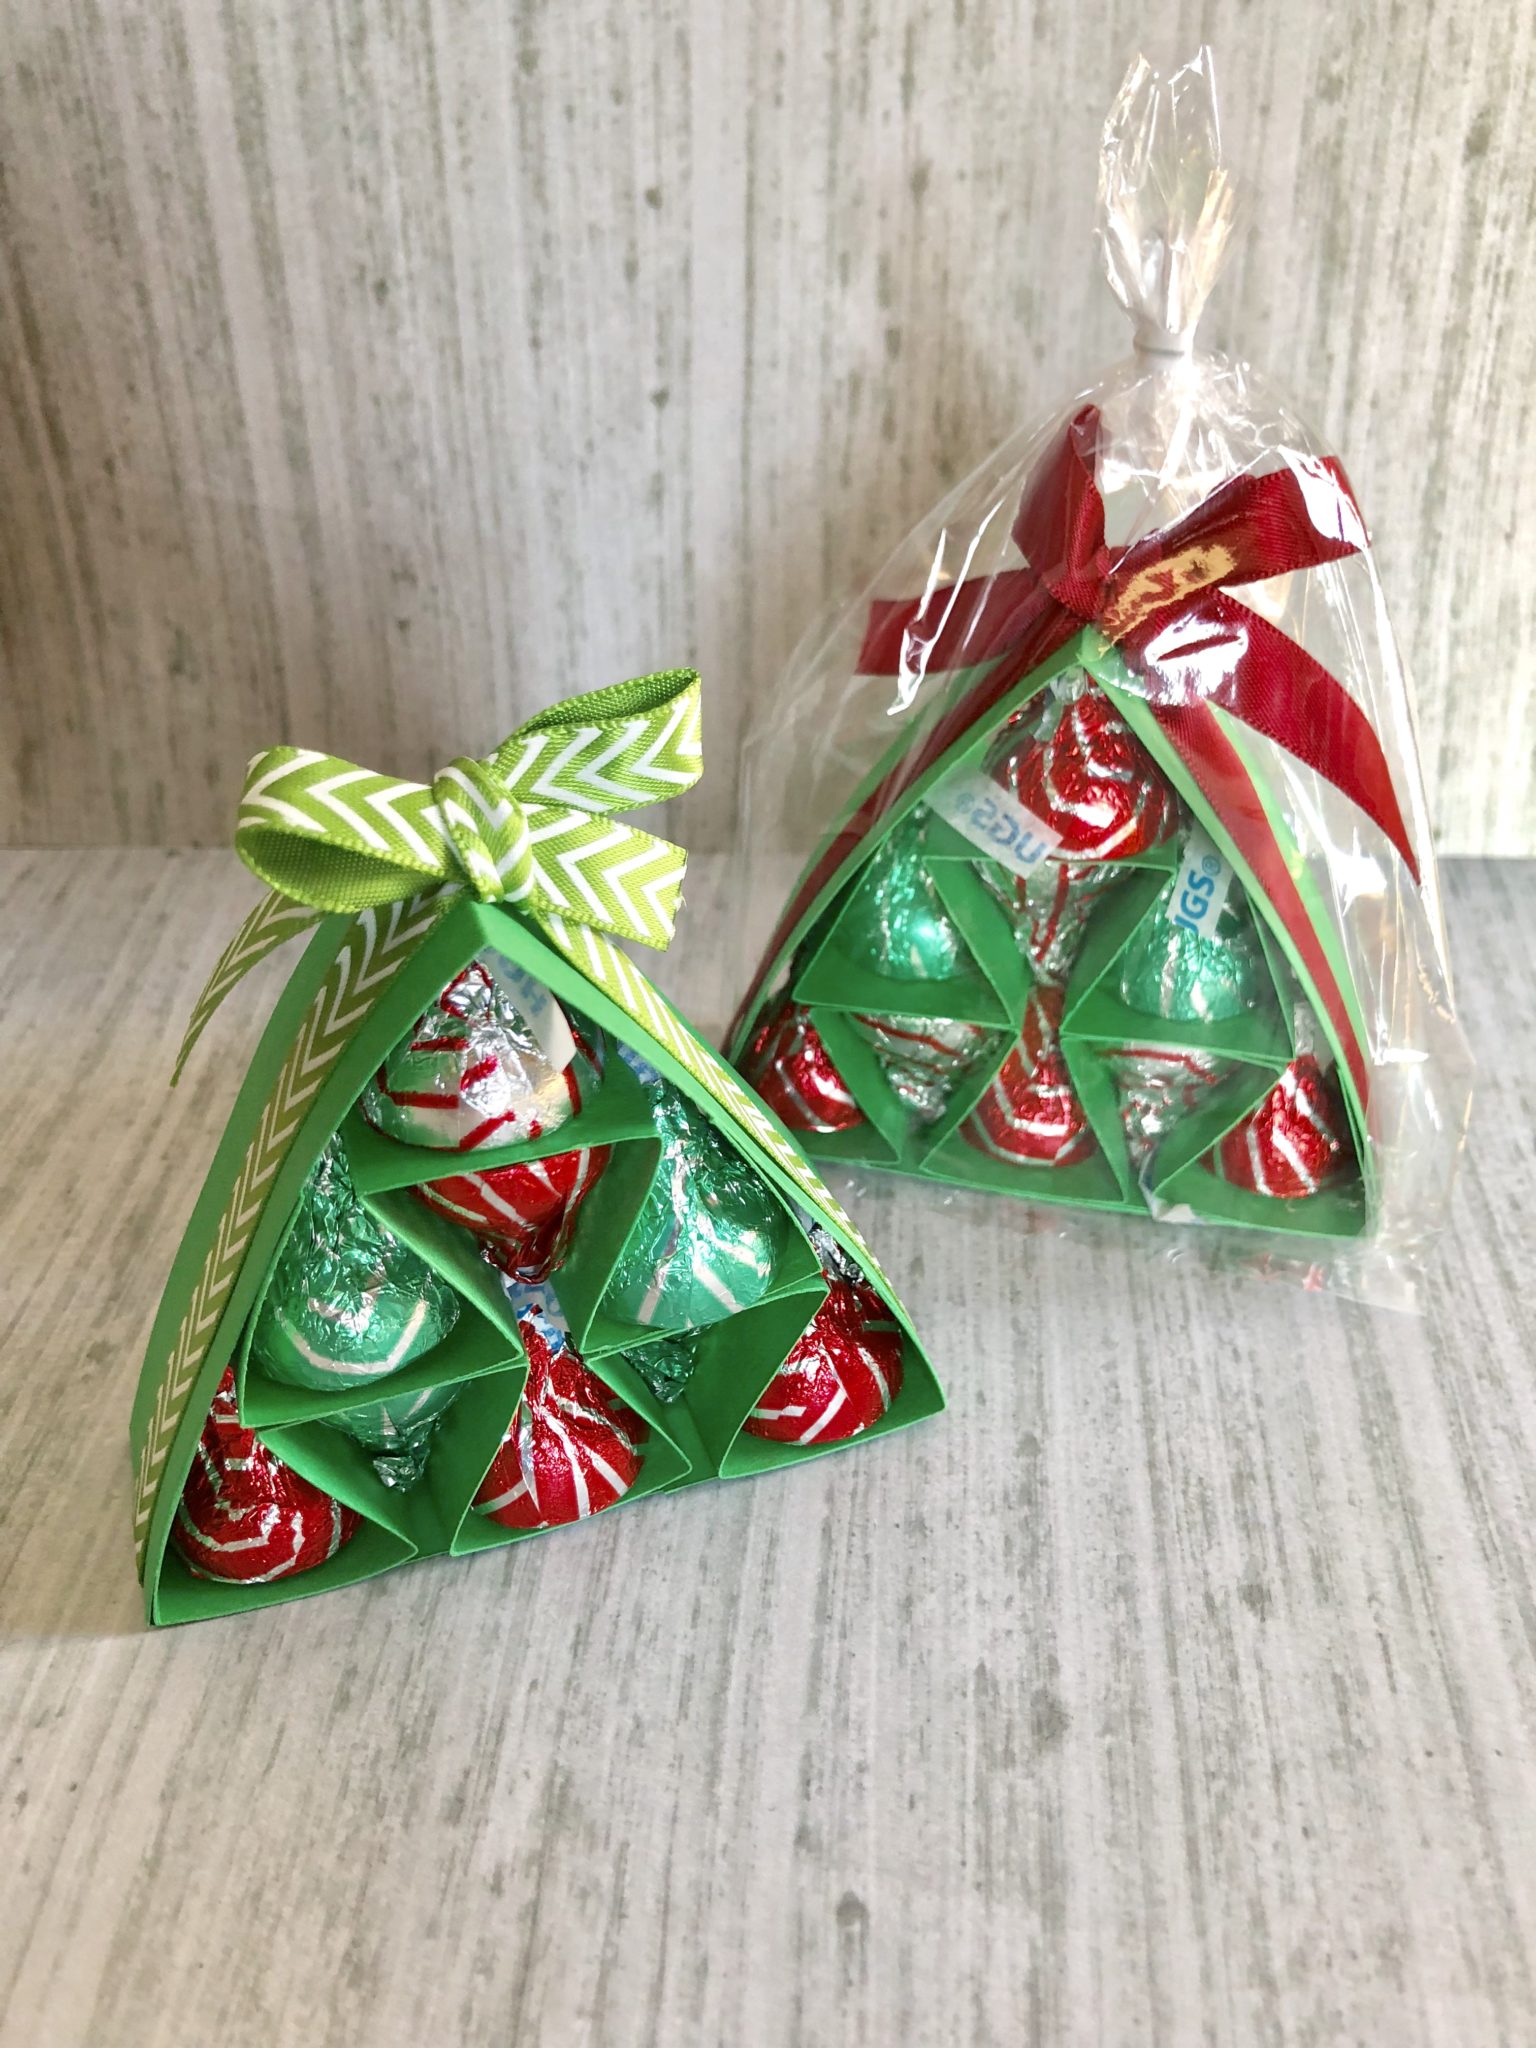 Hershey kisses christmas trees in cellophane bags